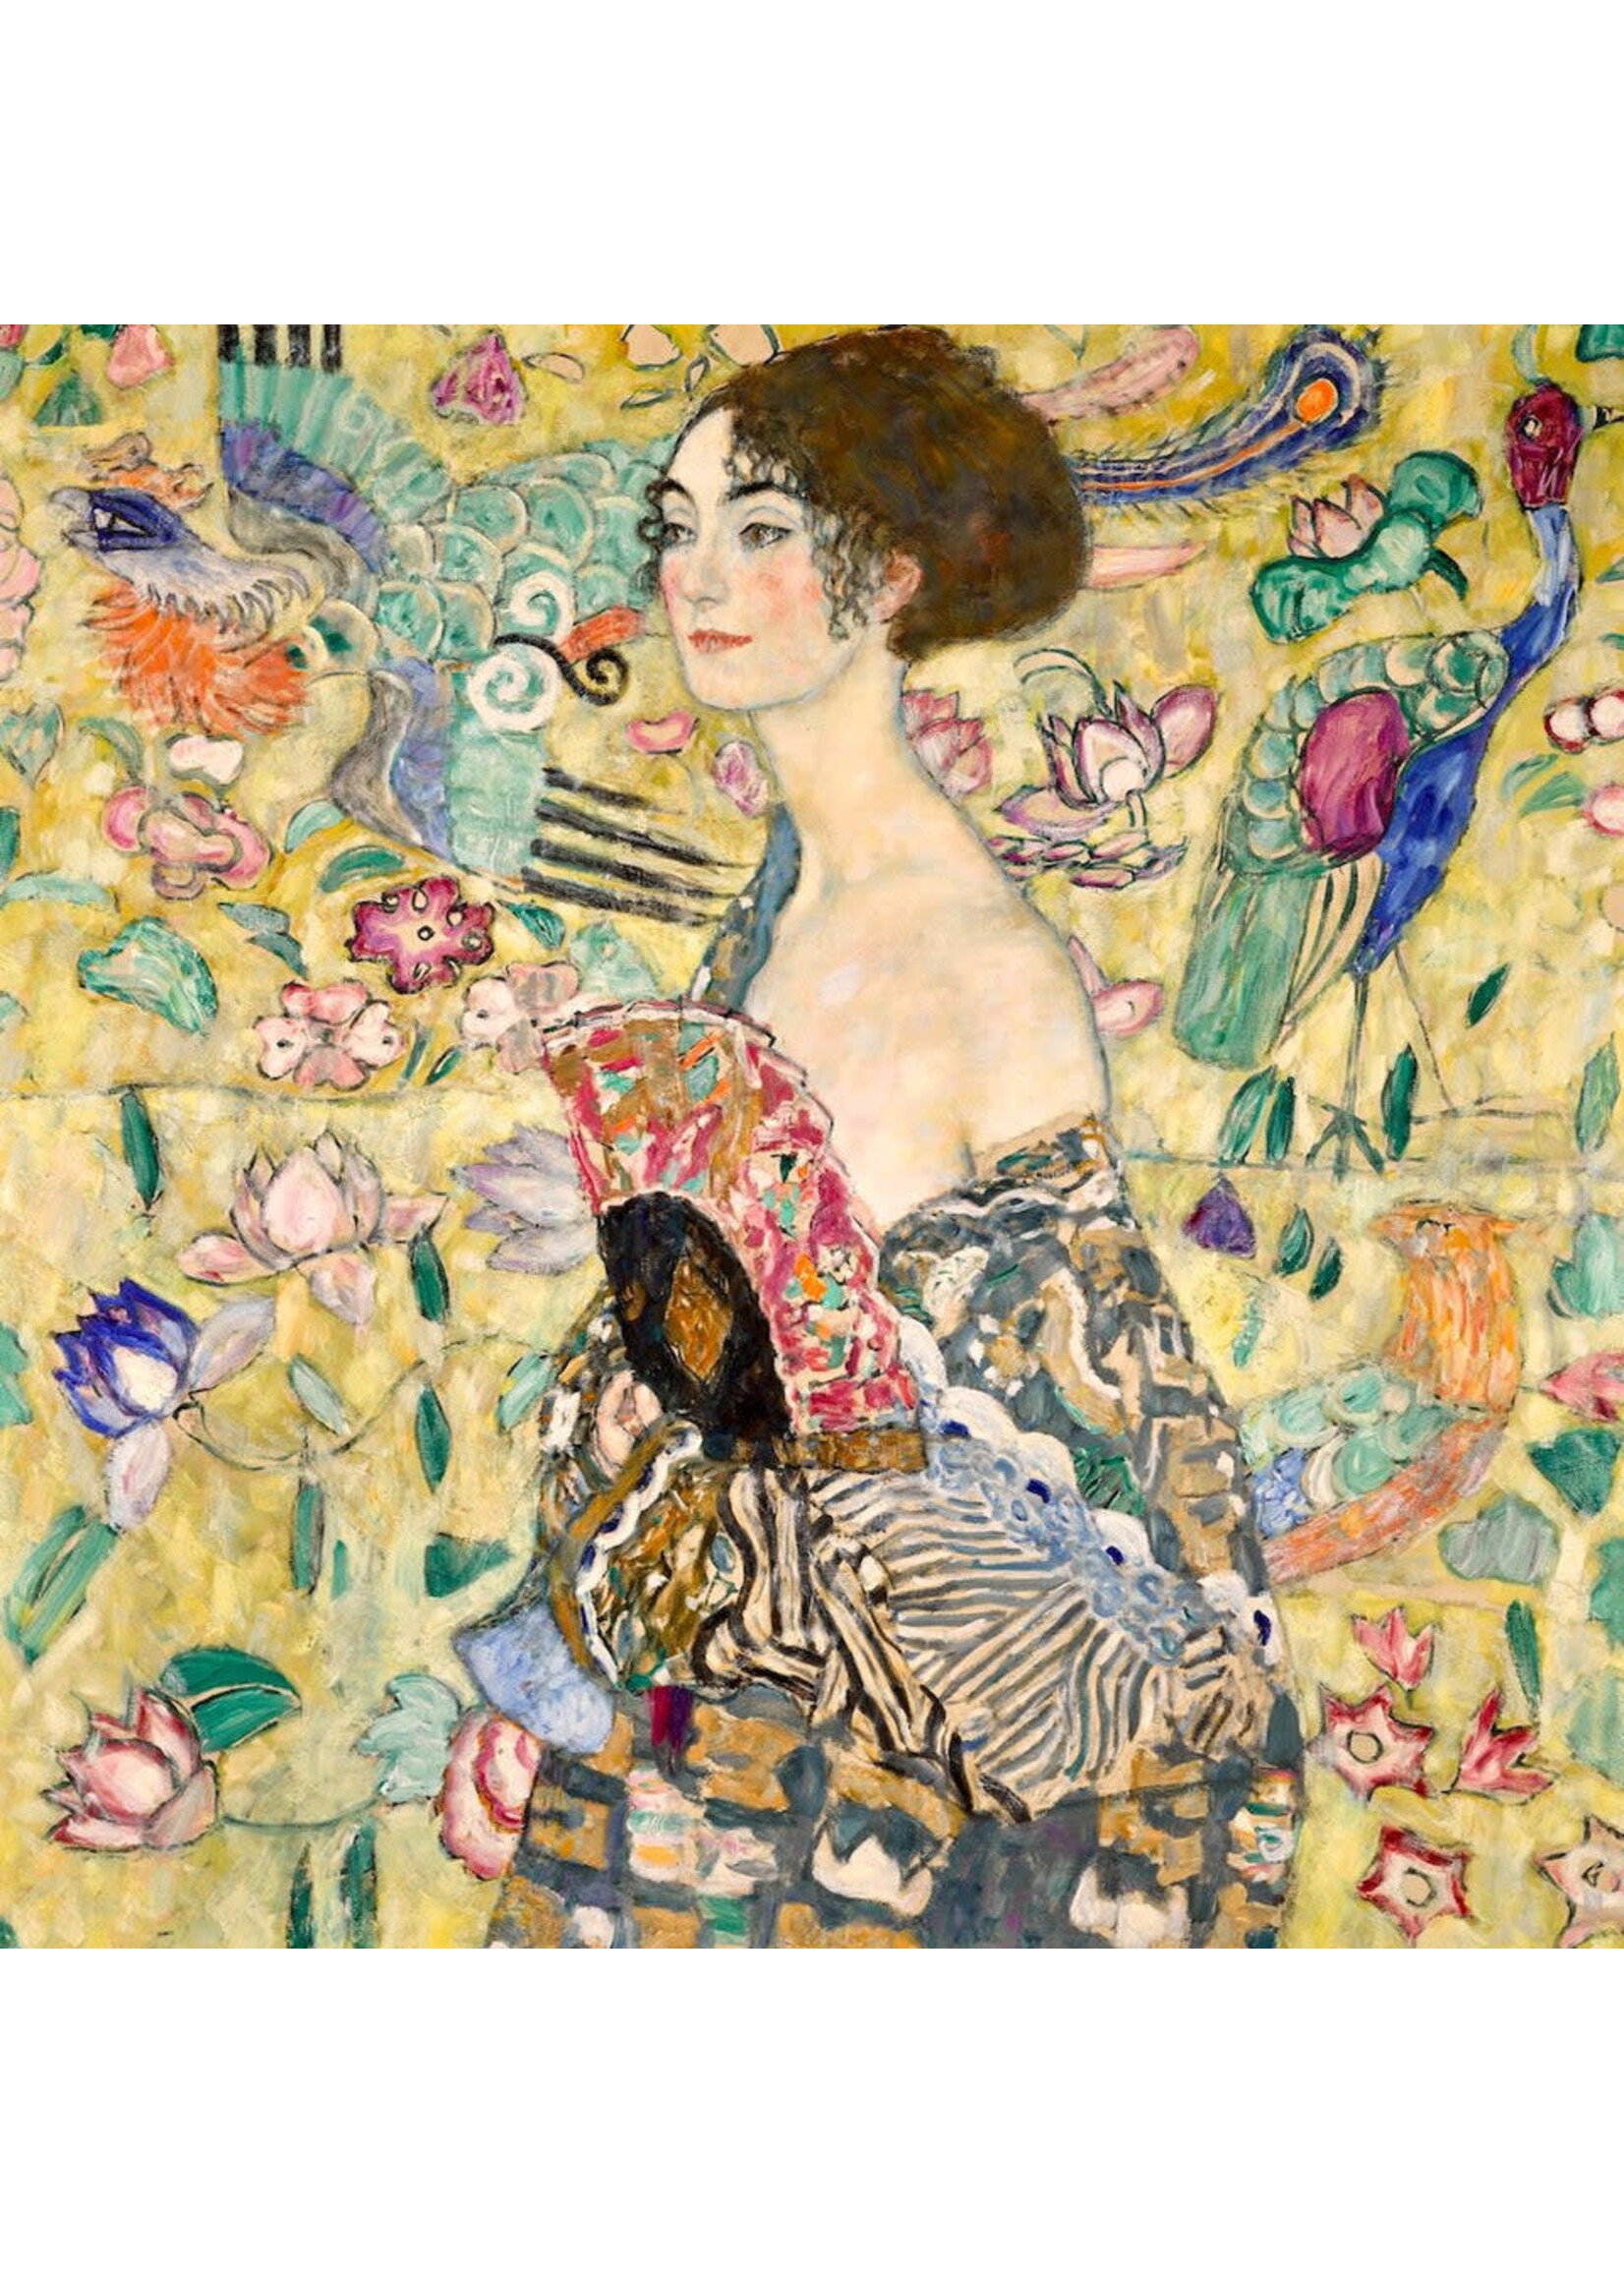 Artifact Puzzles "Klimt - Lady with Fan" Artifact Wooden Jigsaw Puzzle